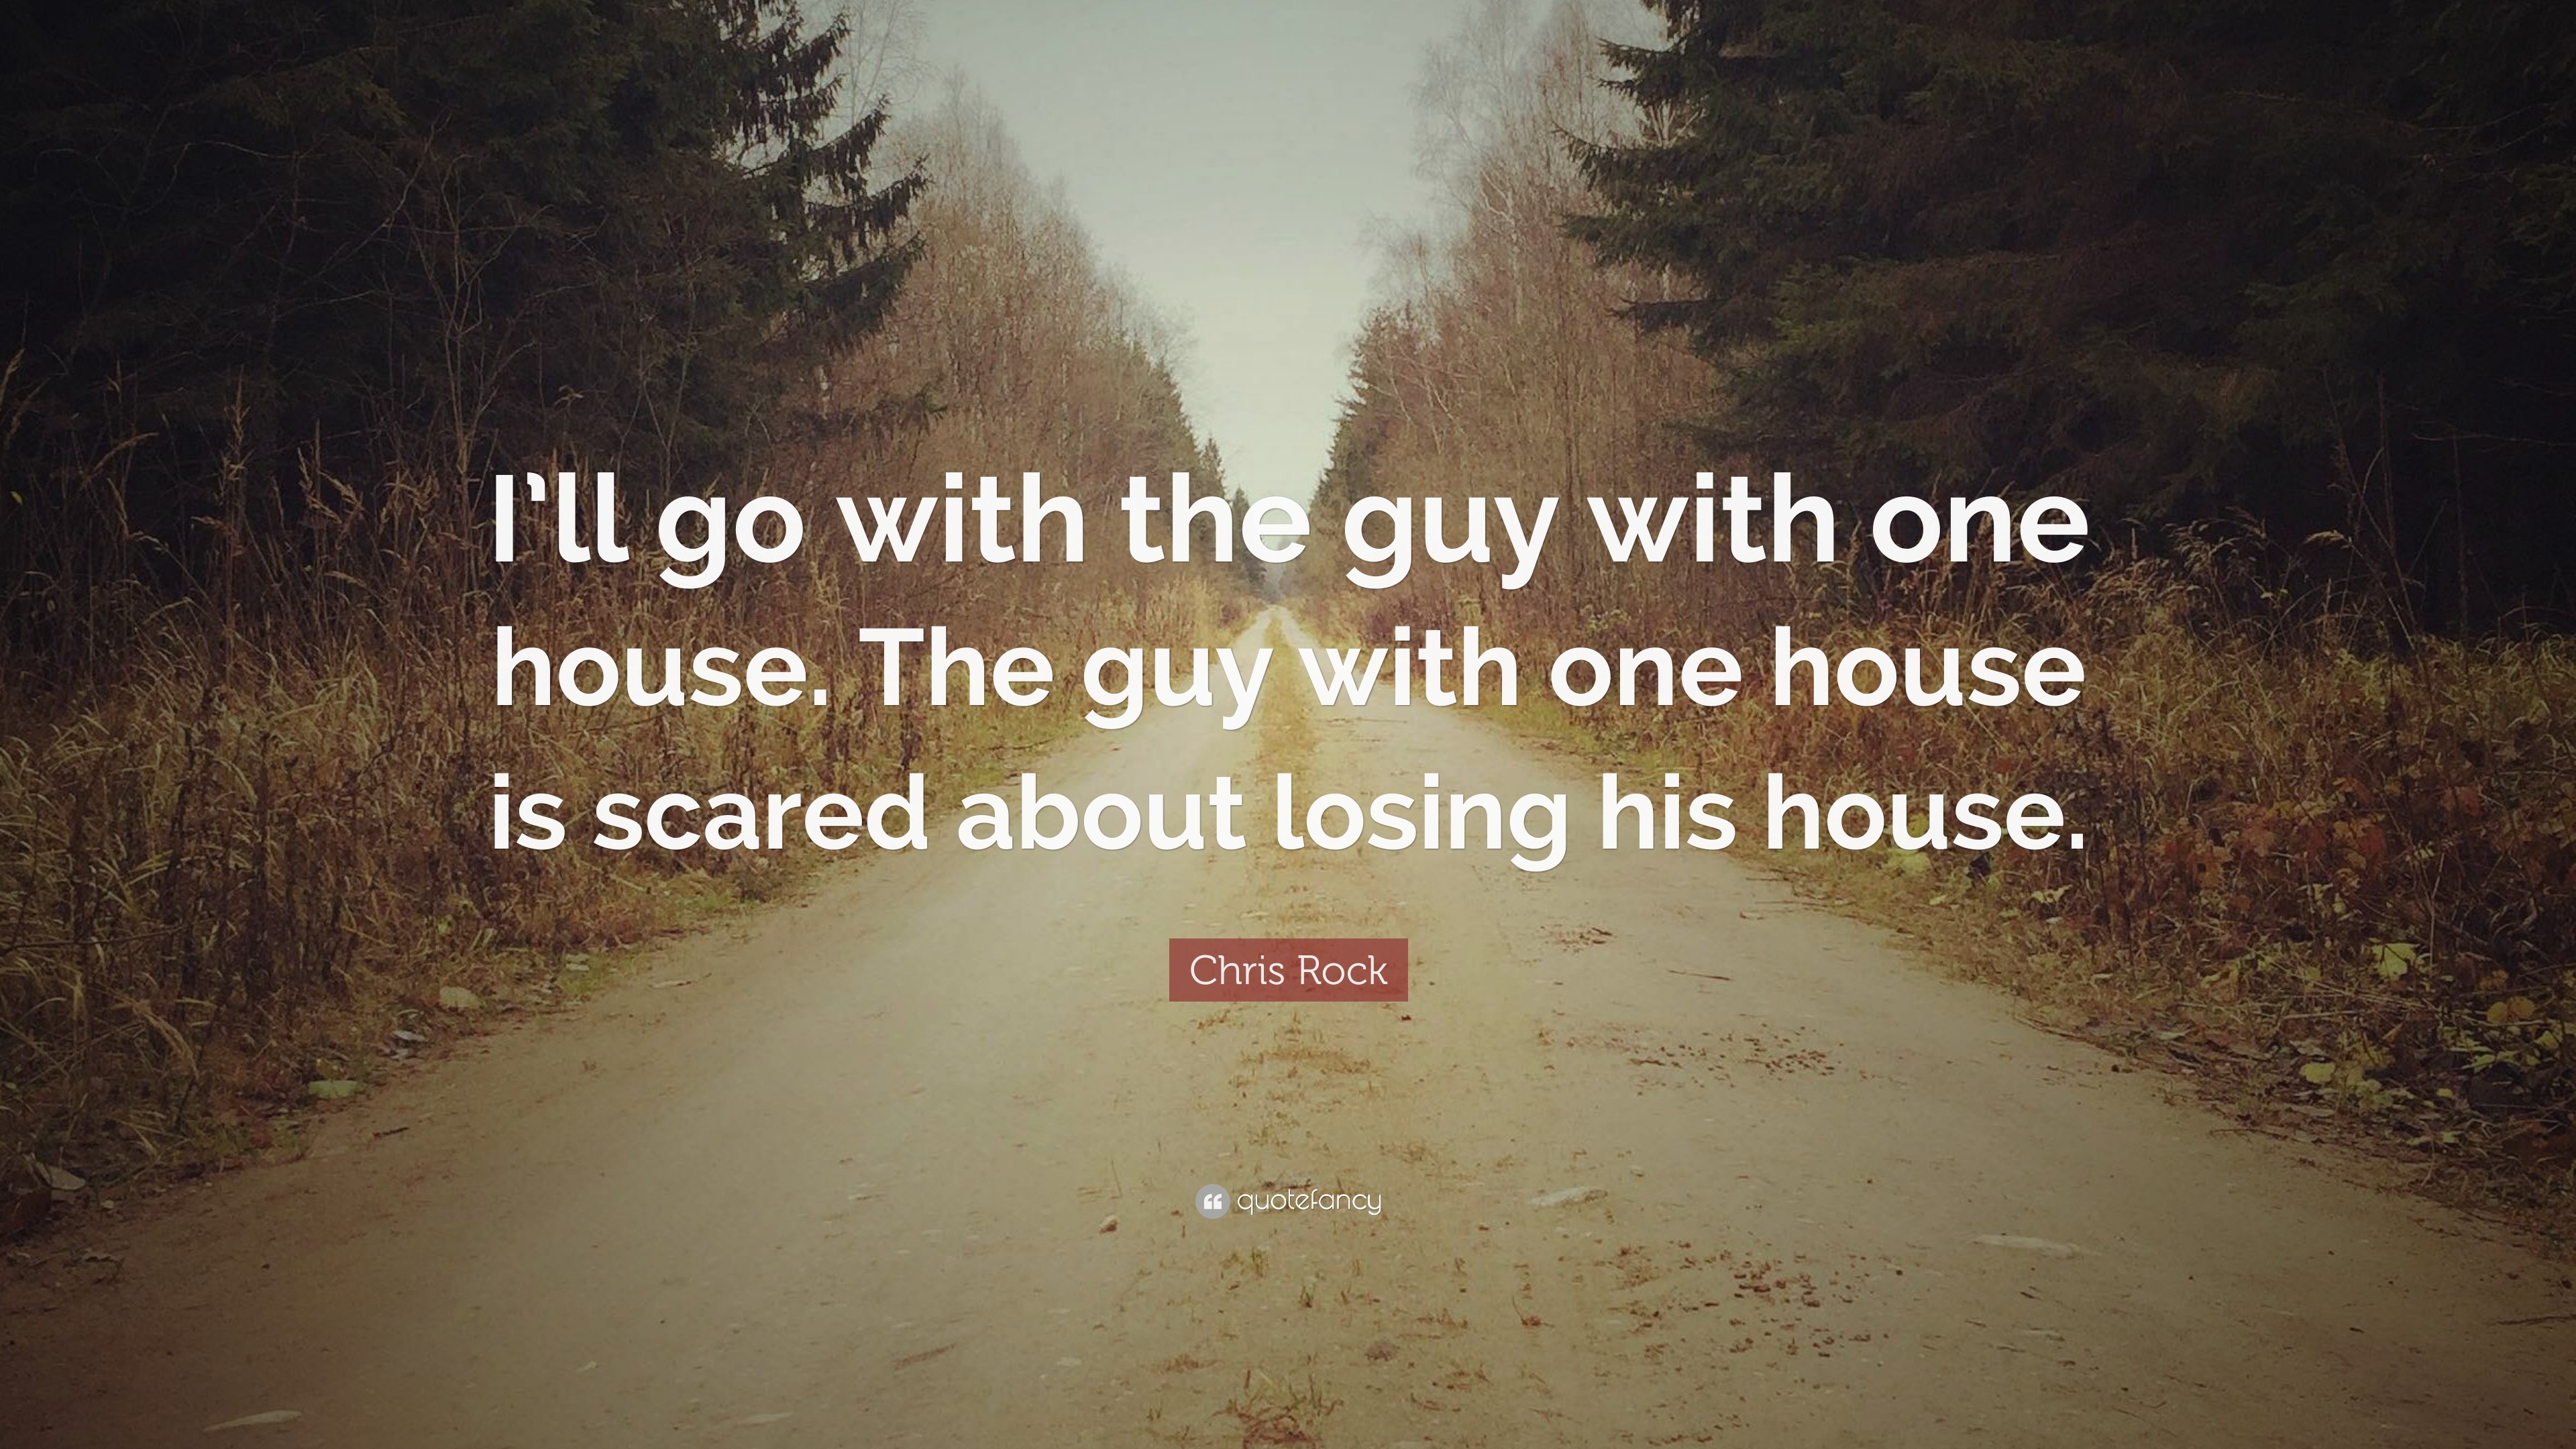 colleen gregg recommends one guy one house pic